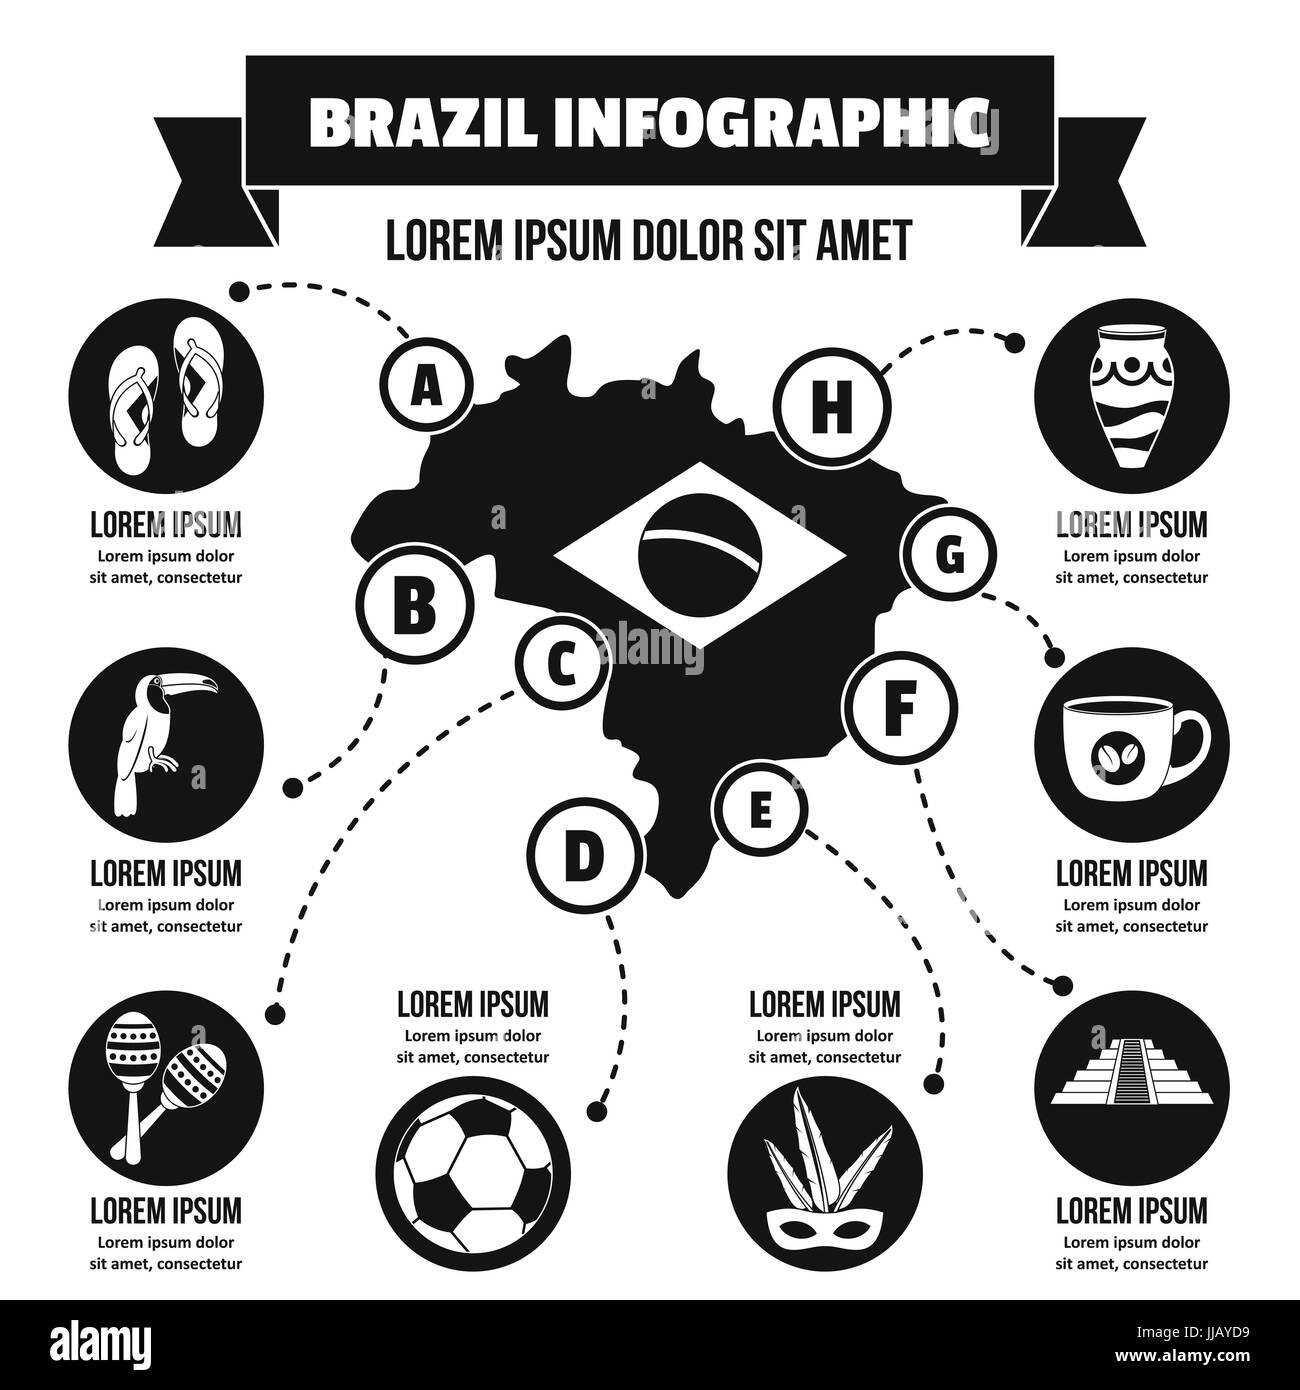 Brazil infographic concept, simple style Stock Vector